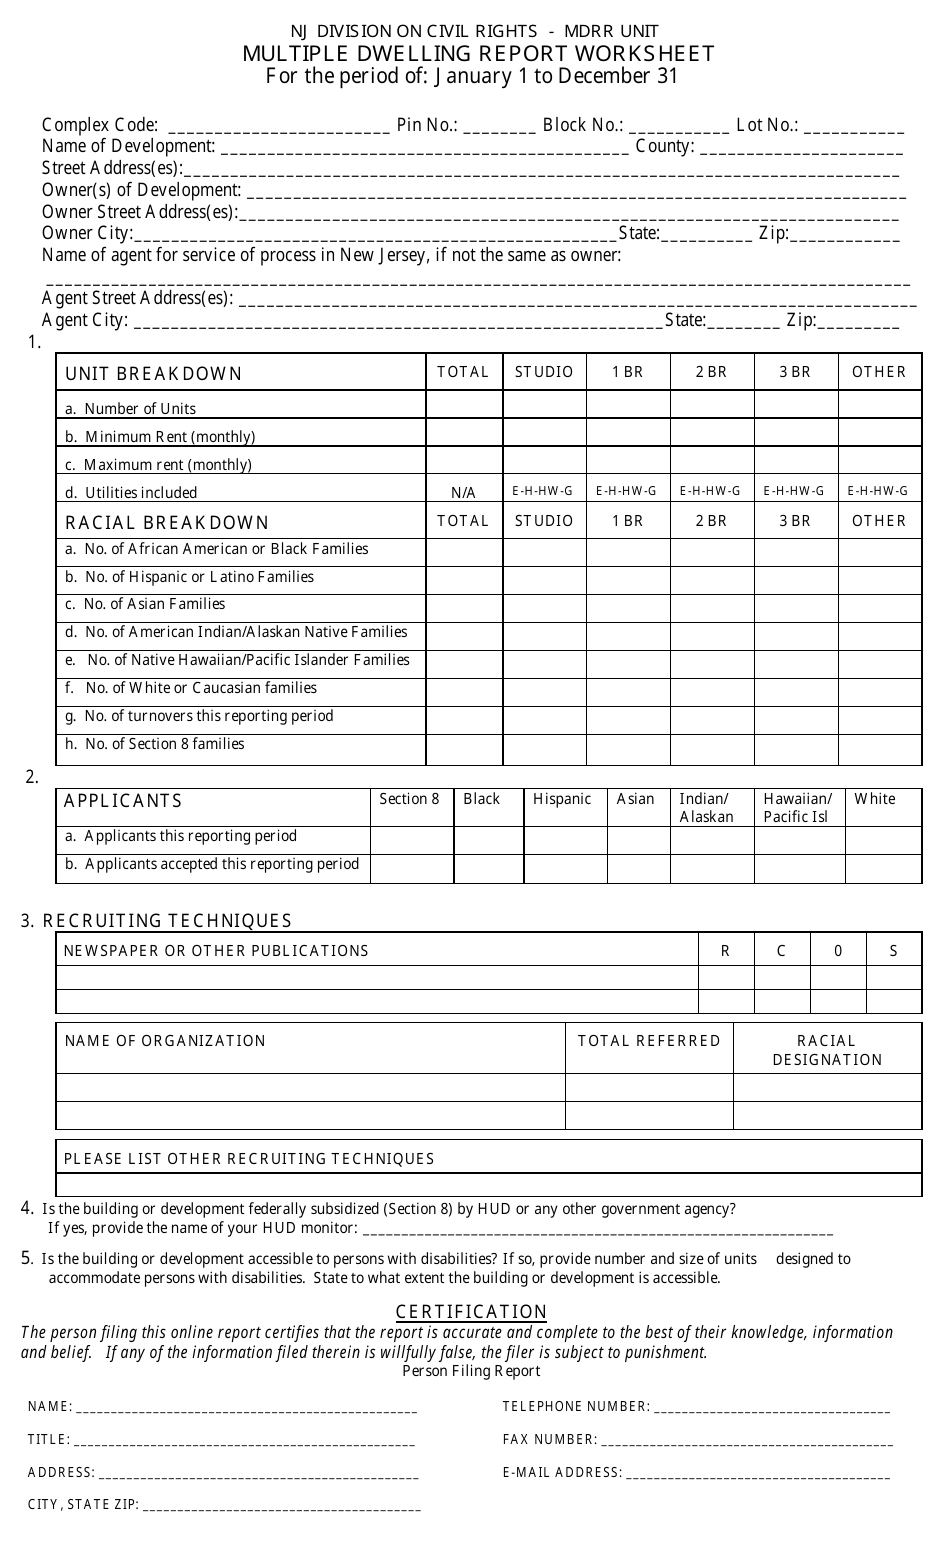 Multiple Dwelling Report Worksheet - New Jersey, Page 1